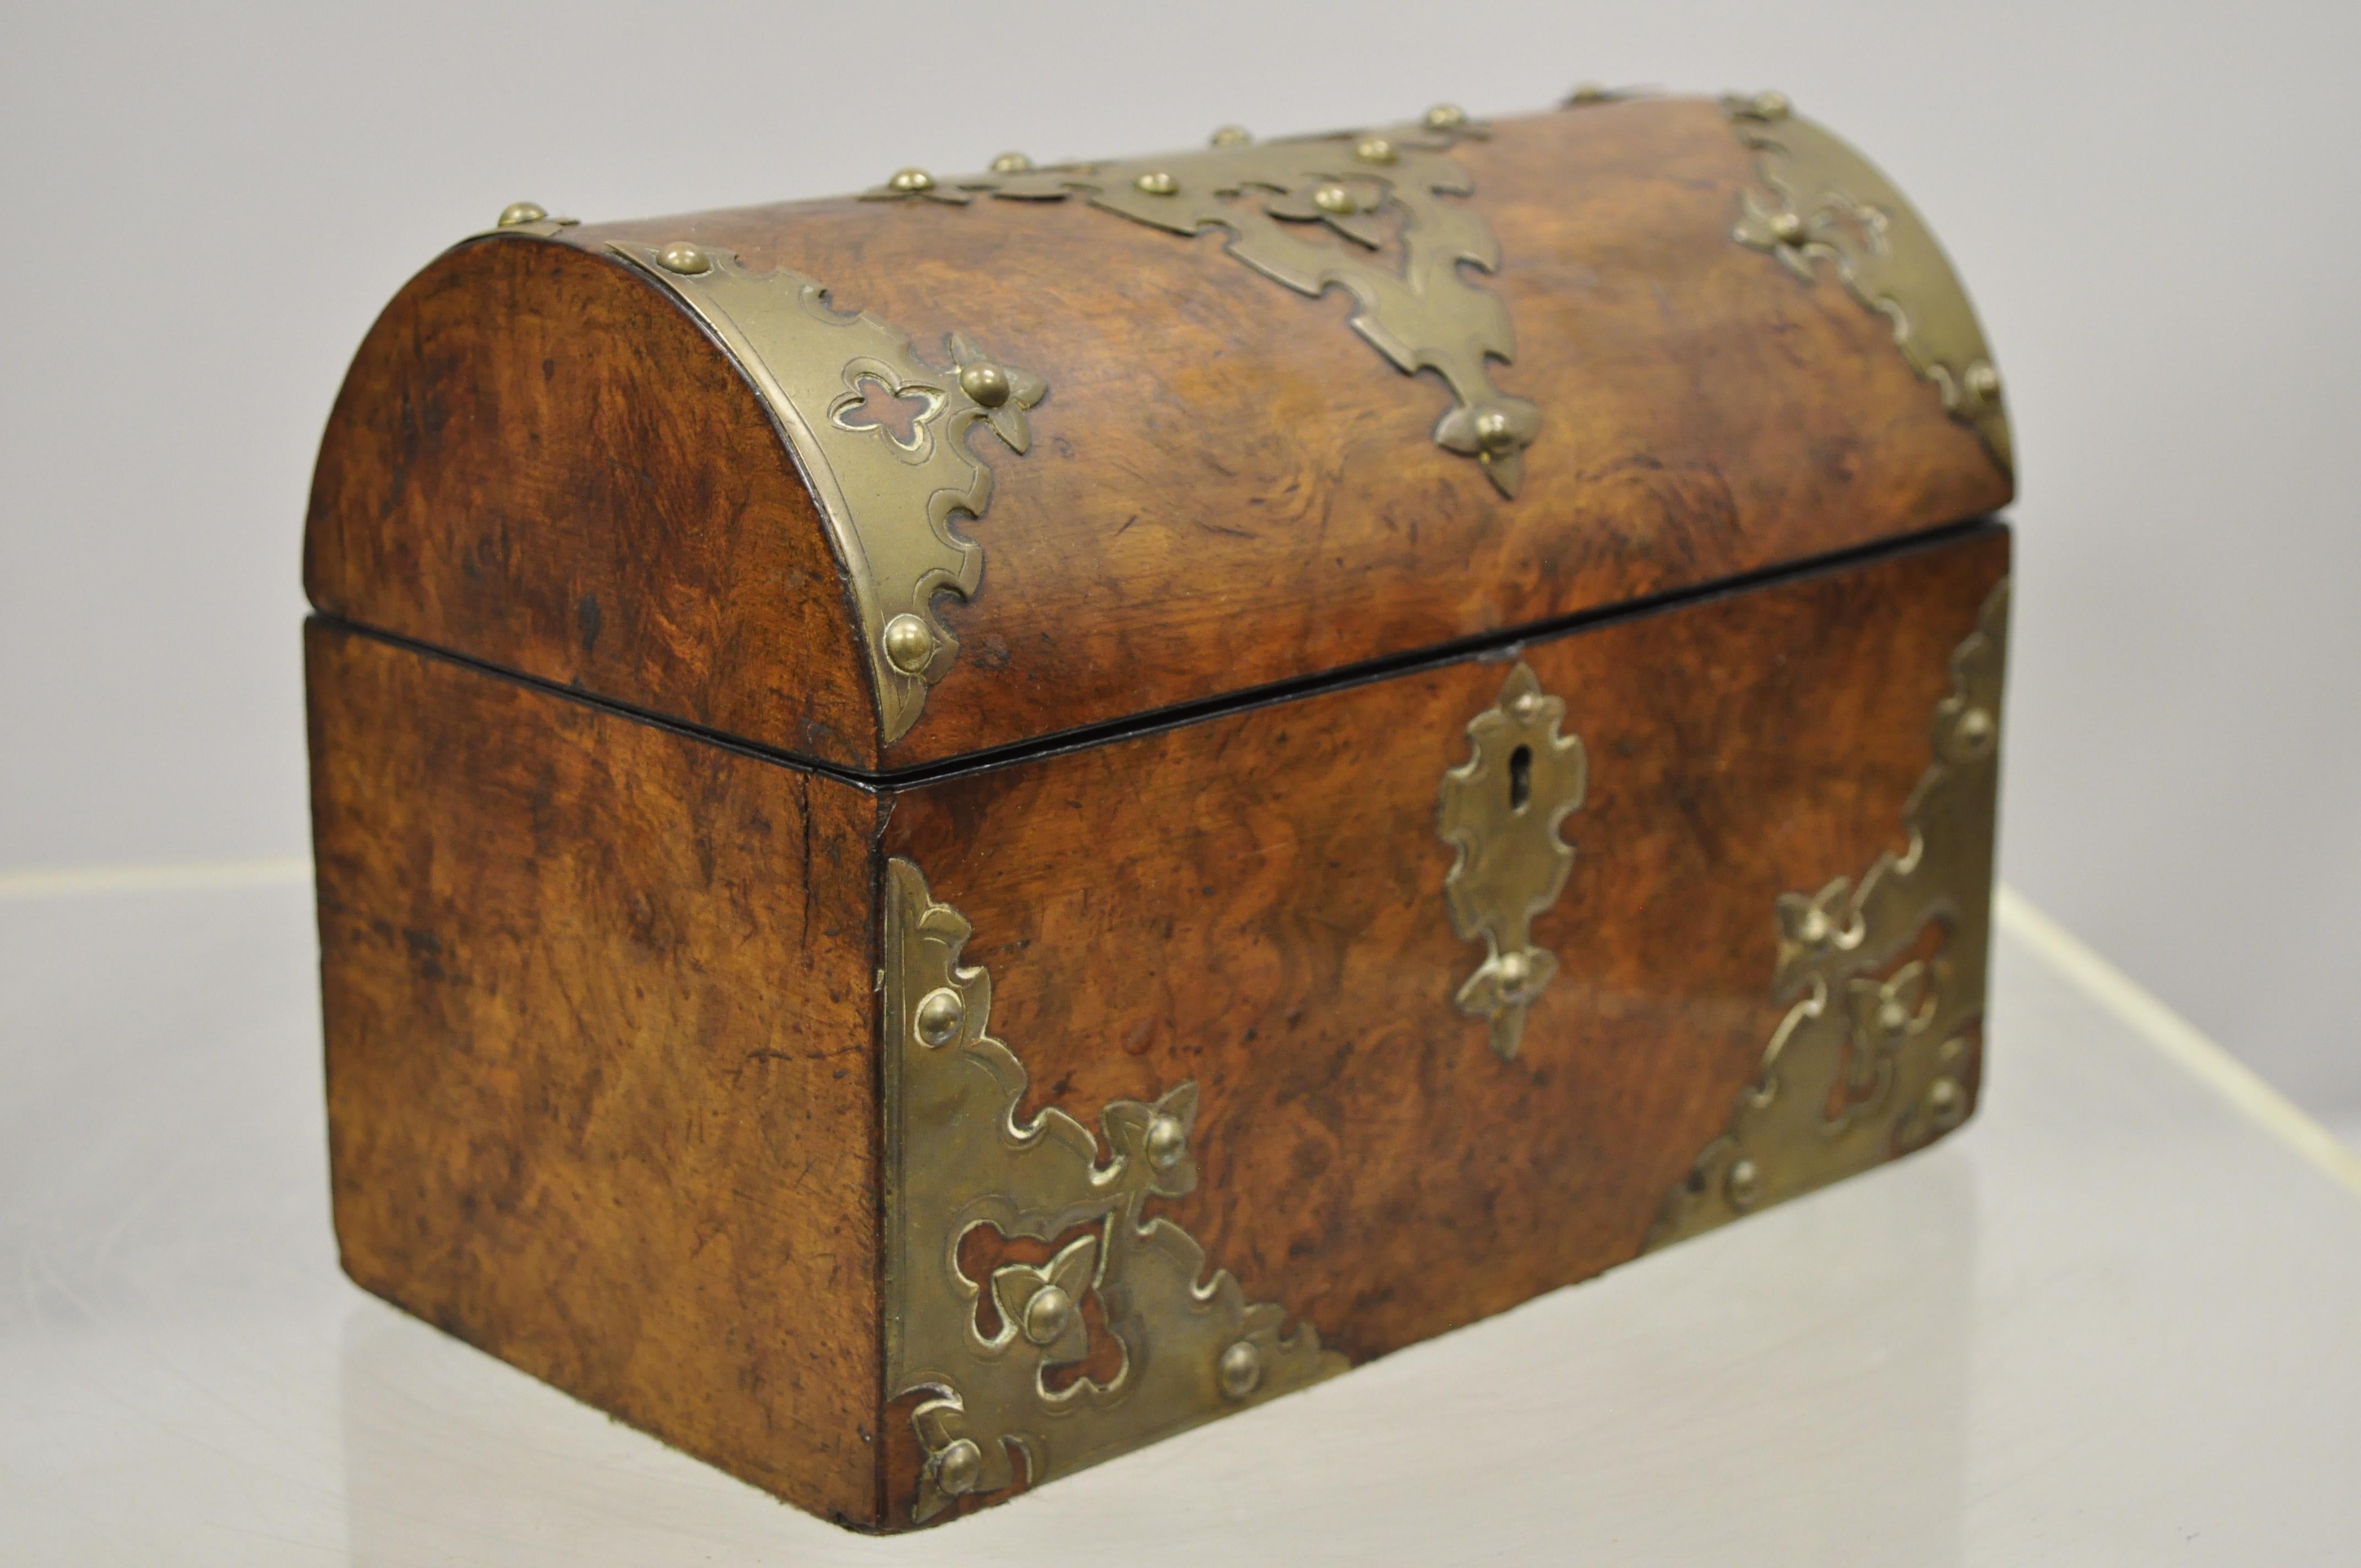 Antique 19th century burl wood and brass tea caddy trinket document desk box. Item features beautiful wood grain, no key, but unlocked, solid brass hardware, very nice antique item, circa late 19th century. Measurements: 6.5